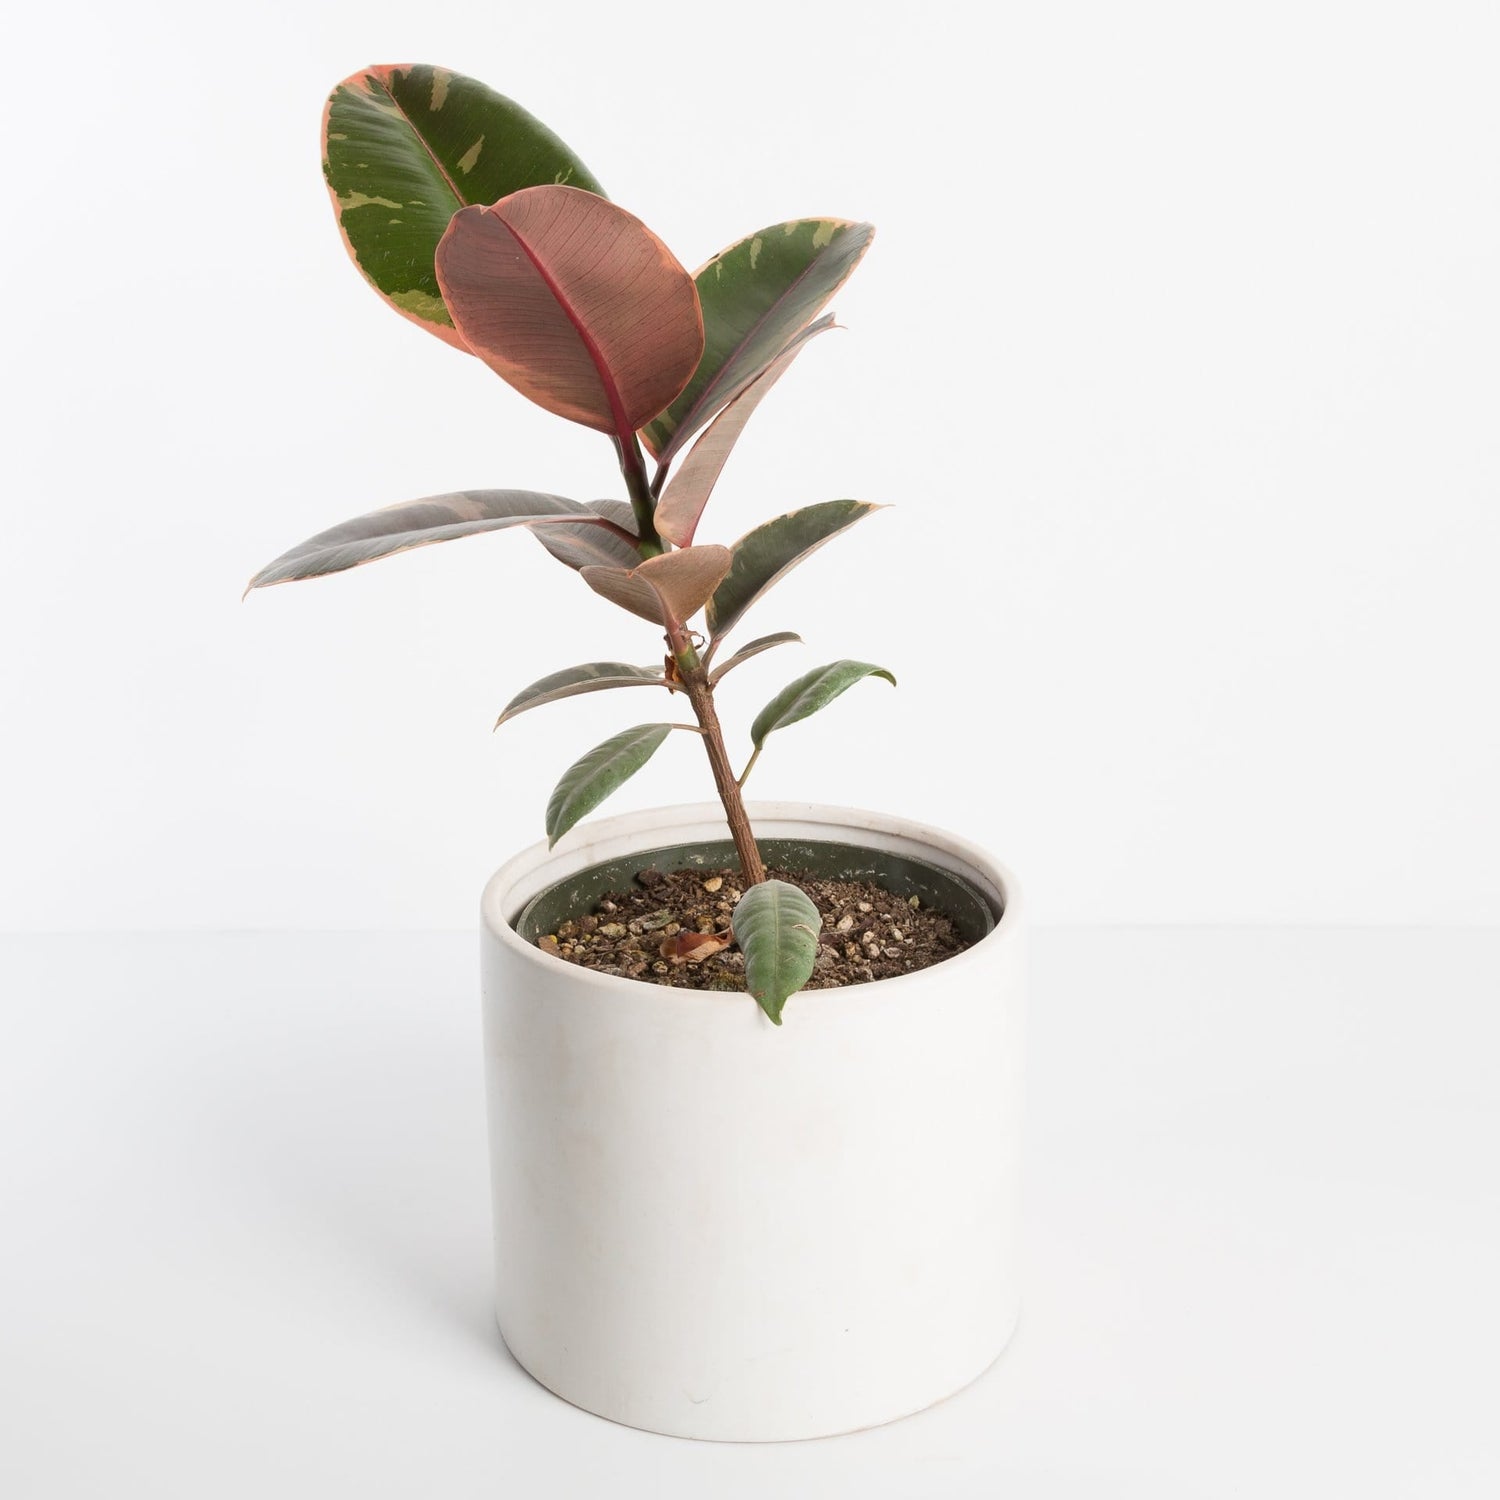 Urban Sprouts Plant 6" in nursery pot Rubber Tree 'Ruby'